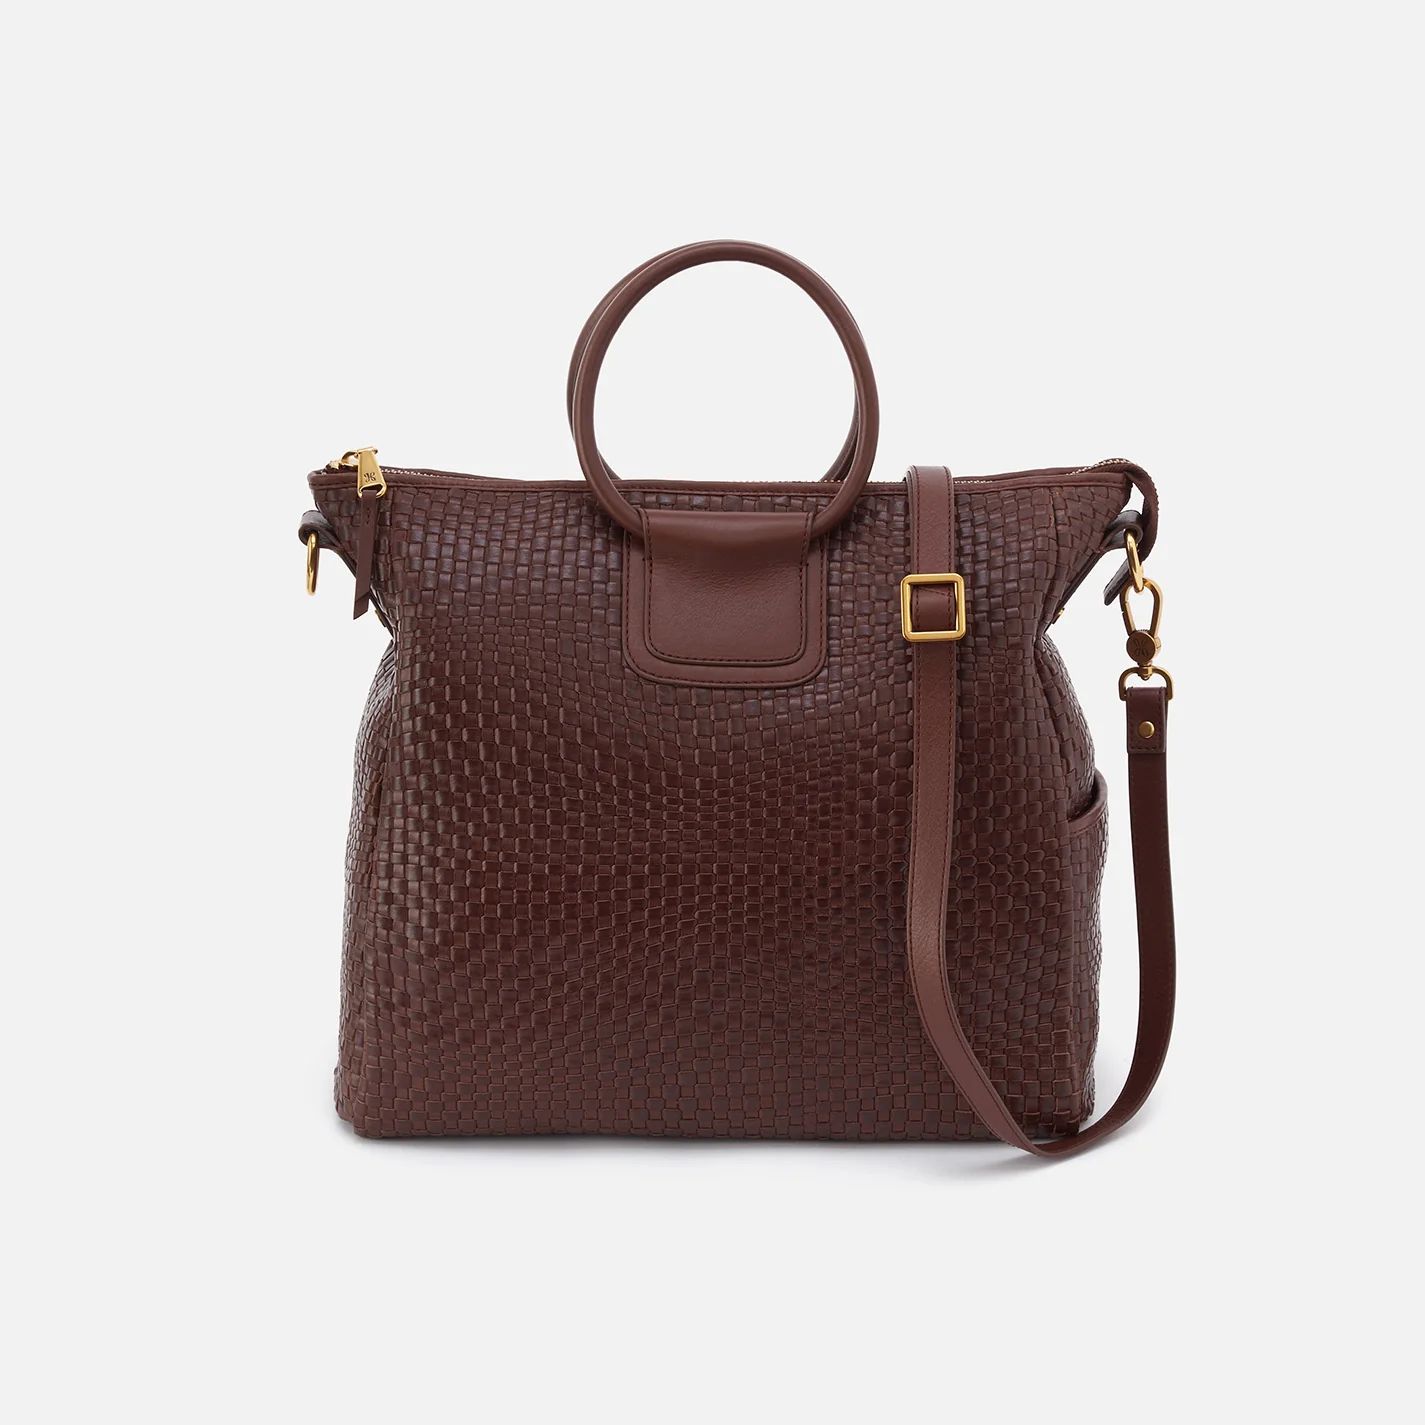 Sheila Large Satchel in Wave Weave Leather - Pecan | HOBO Bags